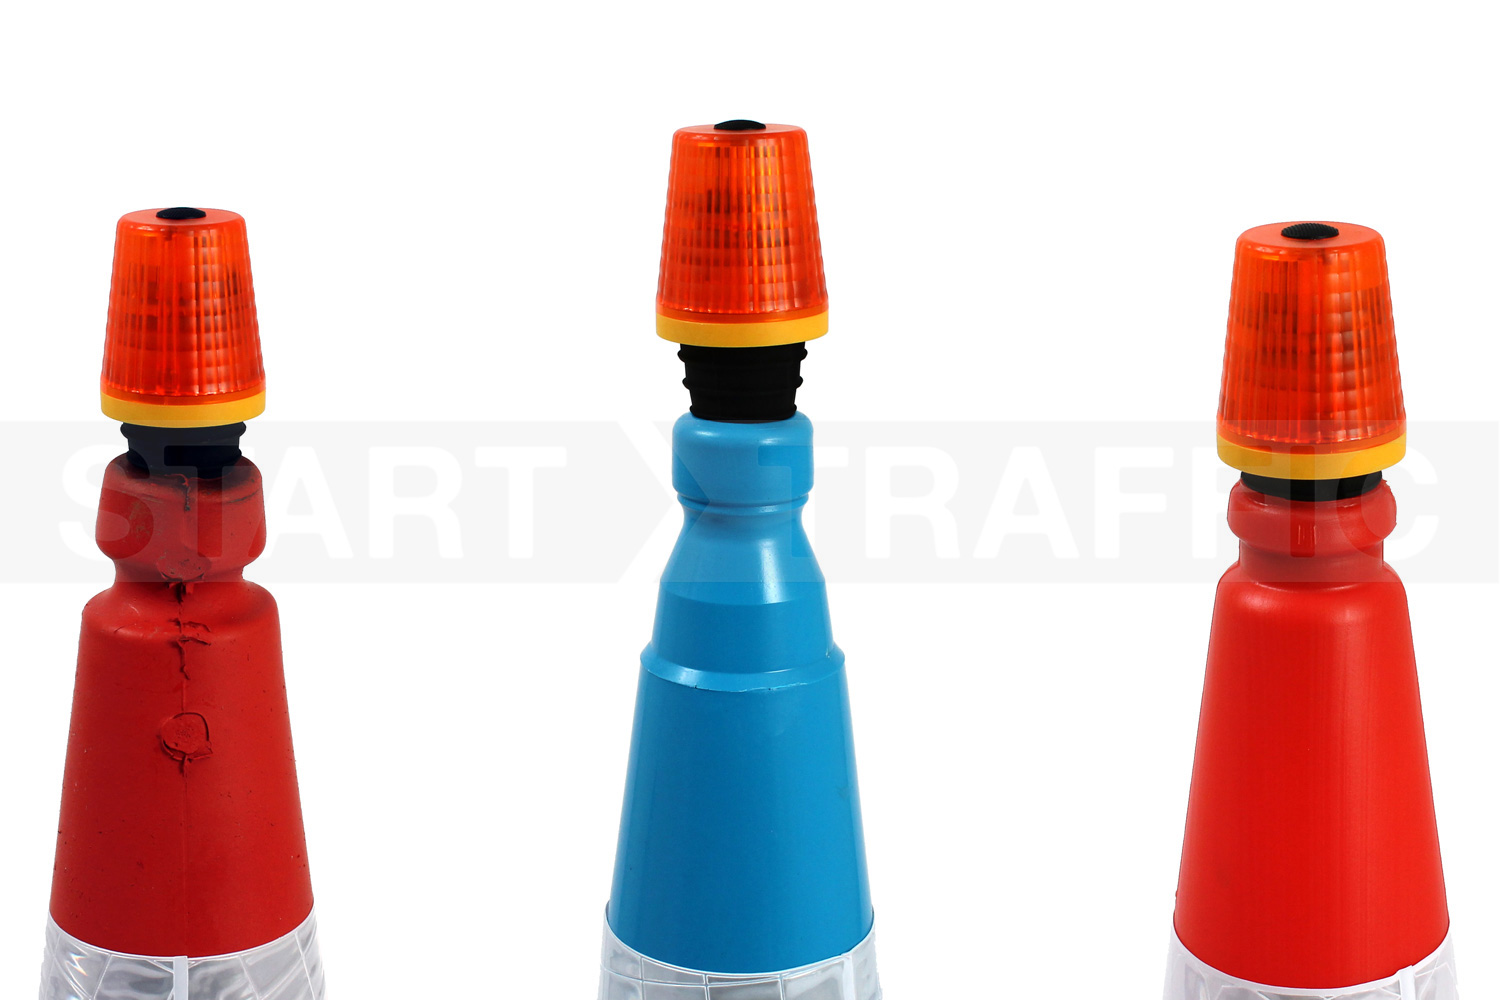 Group Shot Of Some Compatible Traffic Cones